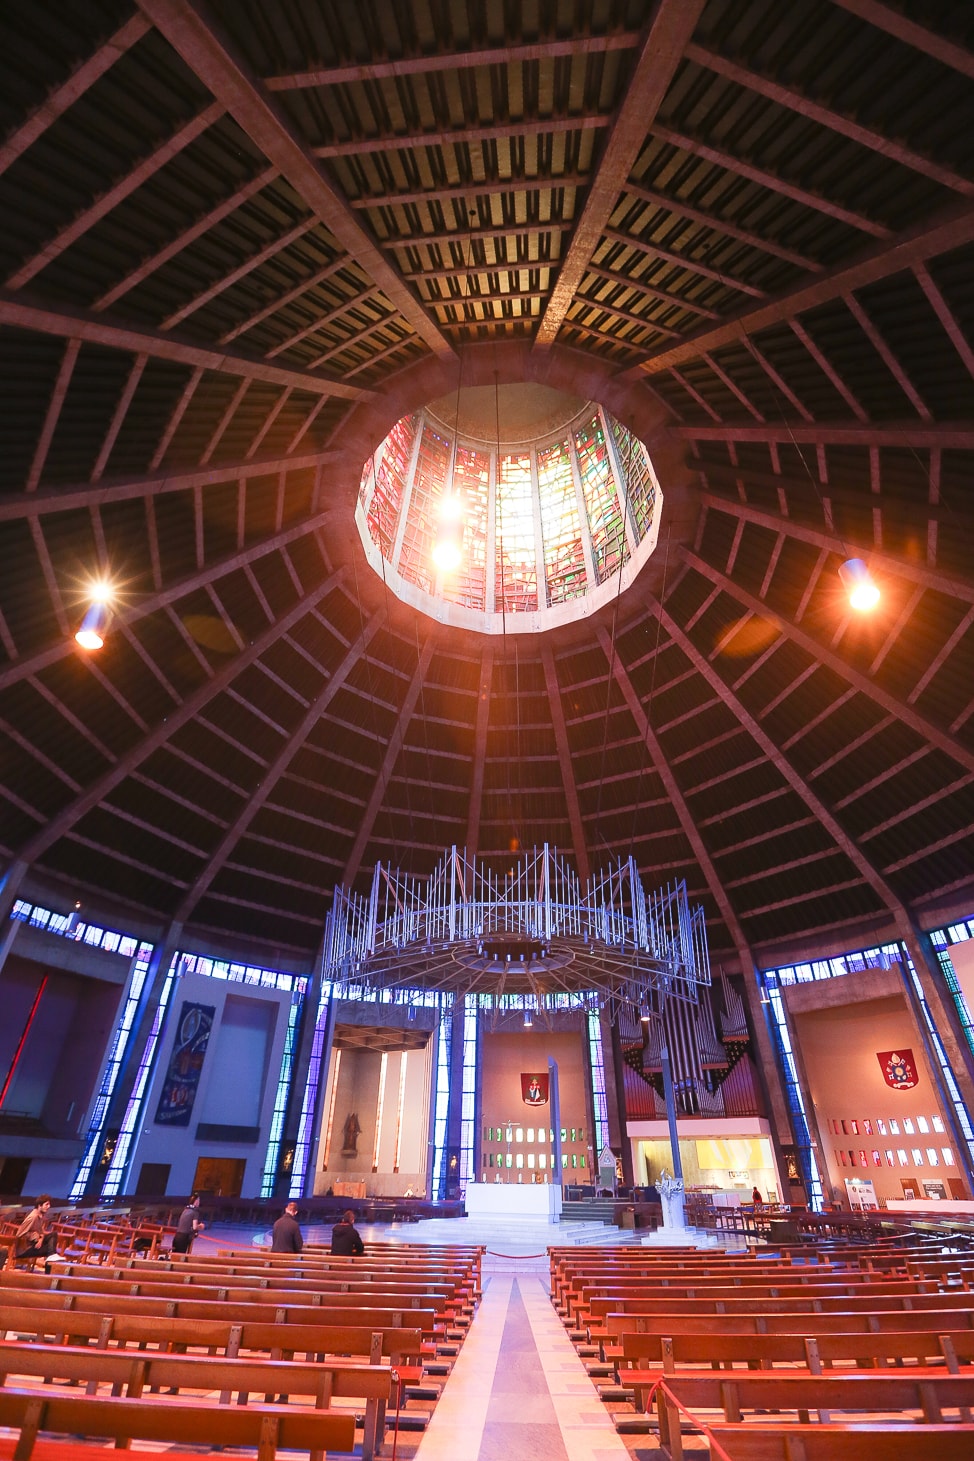 While in Liverpool, be sure and take a stroll around the Georgian Quarter, paying a visit to Liverpool Metropolitan Cathedral as well as stopping in at the free Liverpool Cathedral, an English relics that survived two world wars and is one of the most spectacular buildings in the world.